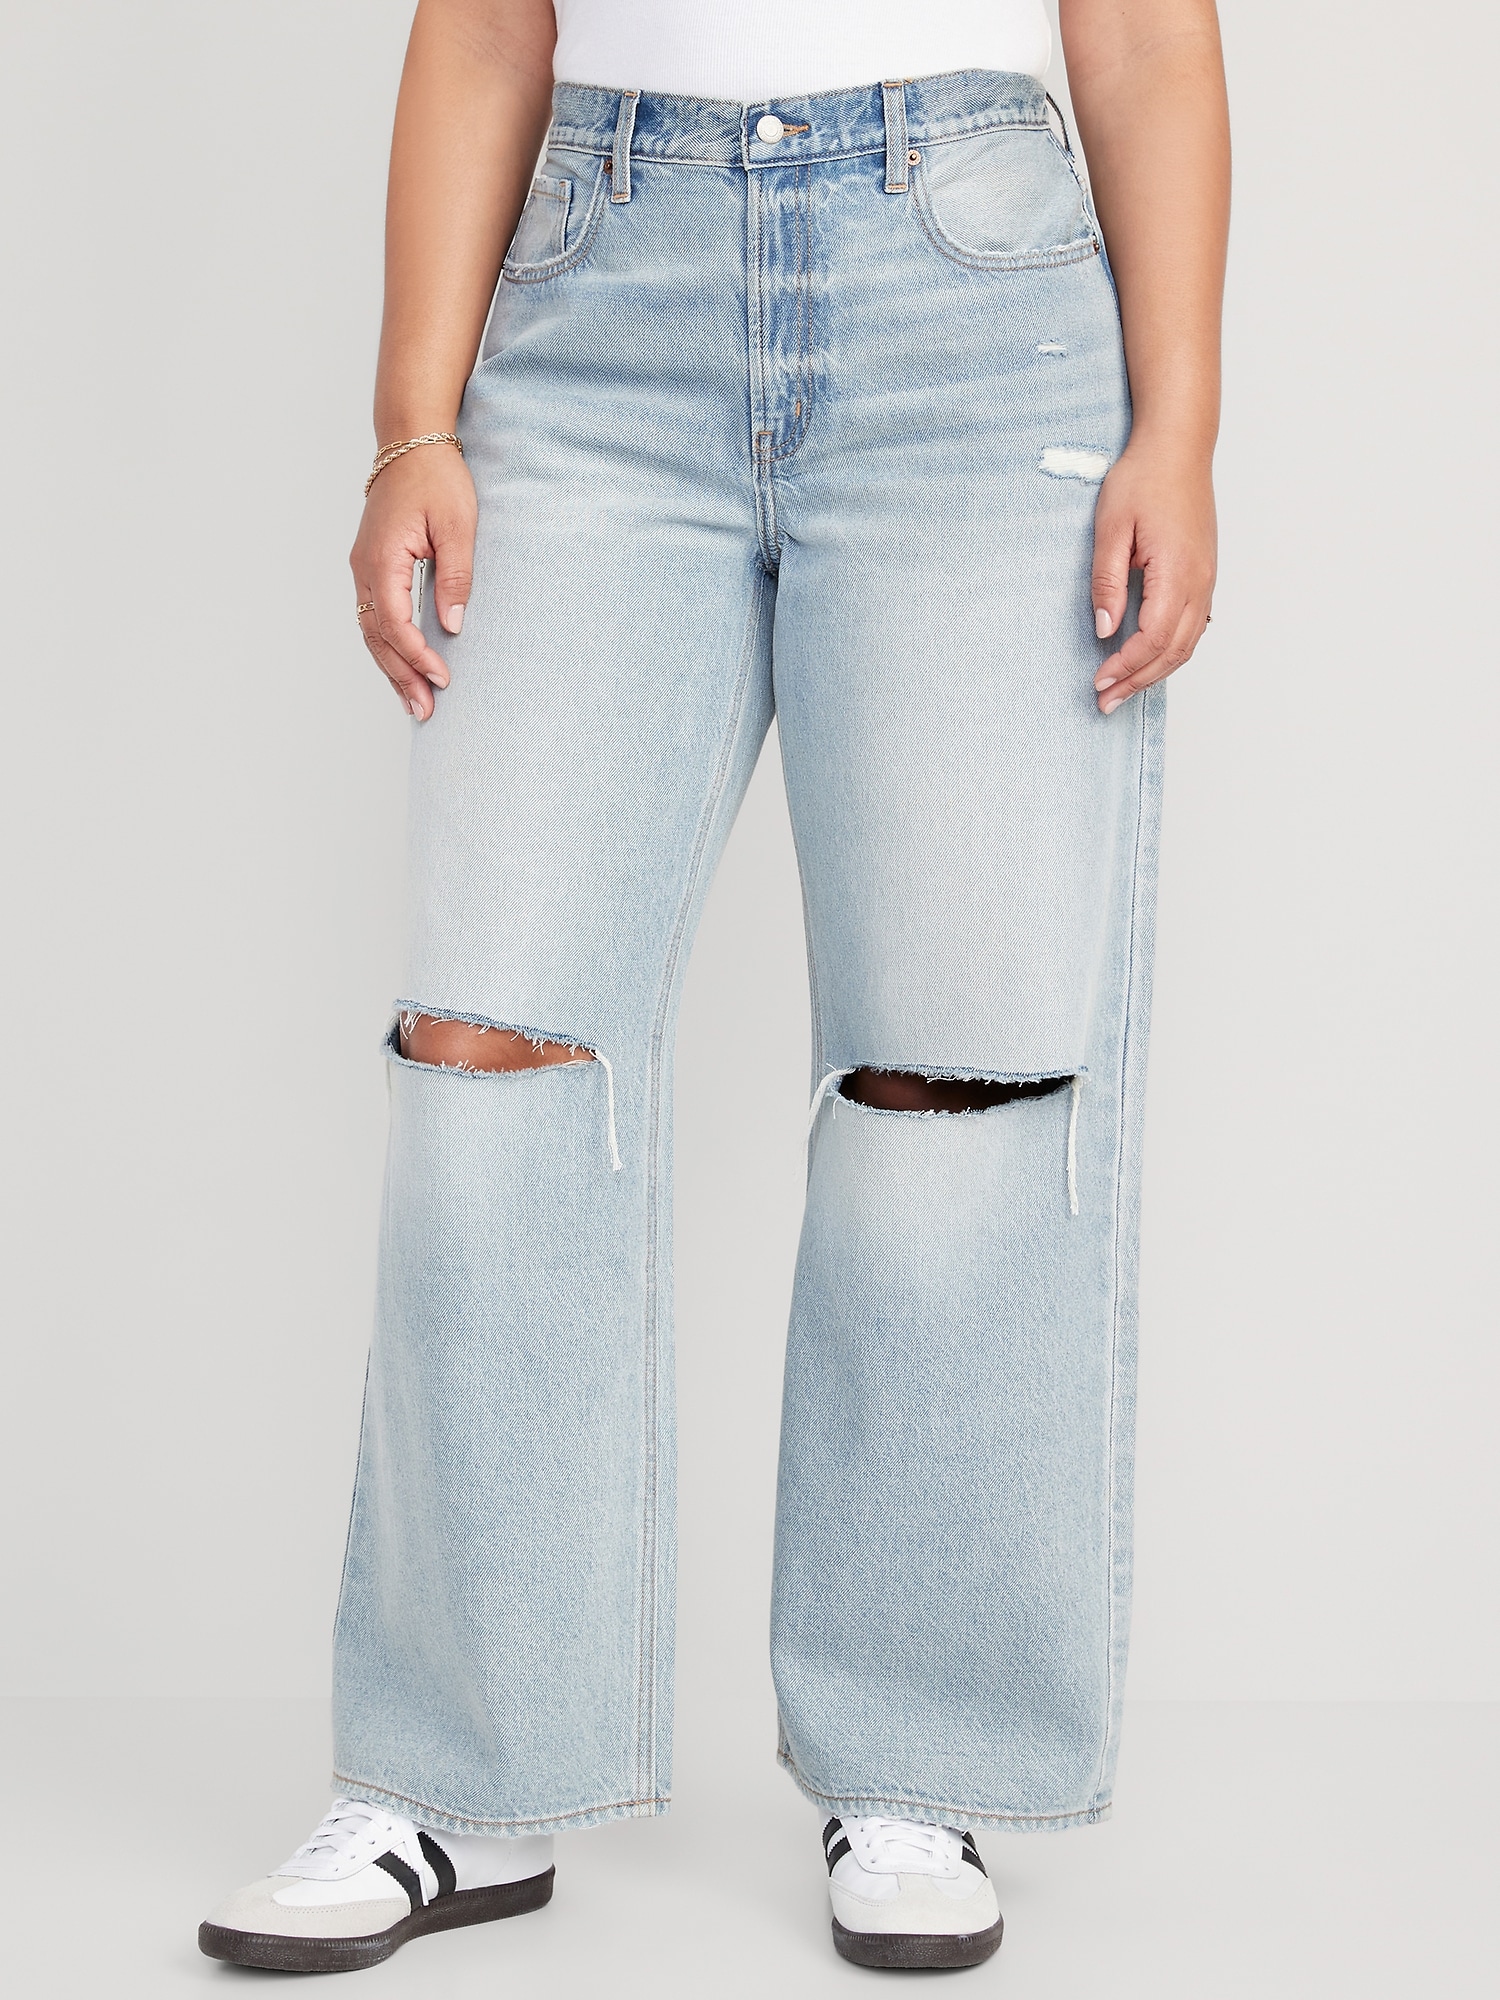 Ripped Holes Casual Baggy Jeans, Loose Fit High Waist Wide Legs Jeans,  Women's Denim Jeans & Clothing